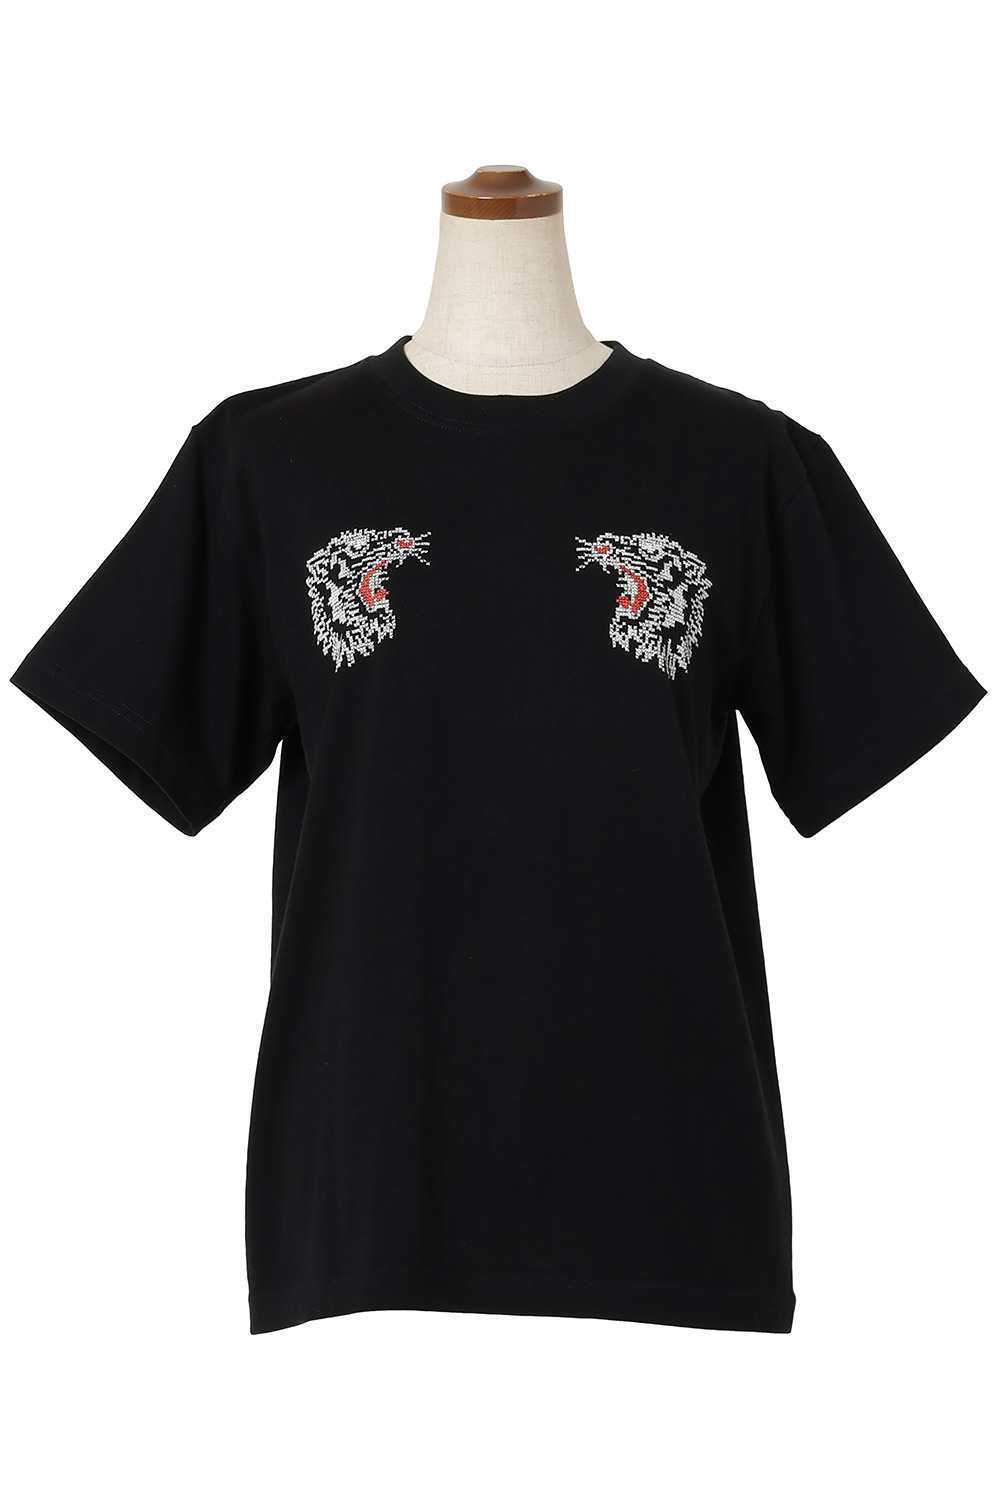 JAPAN Embroidery Style Print Tシャツ 詳細画像 ブラック